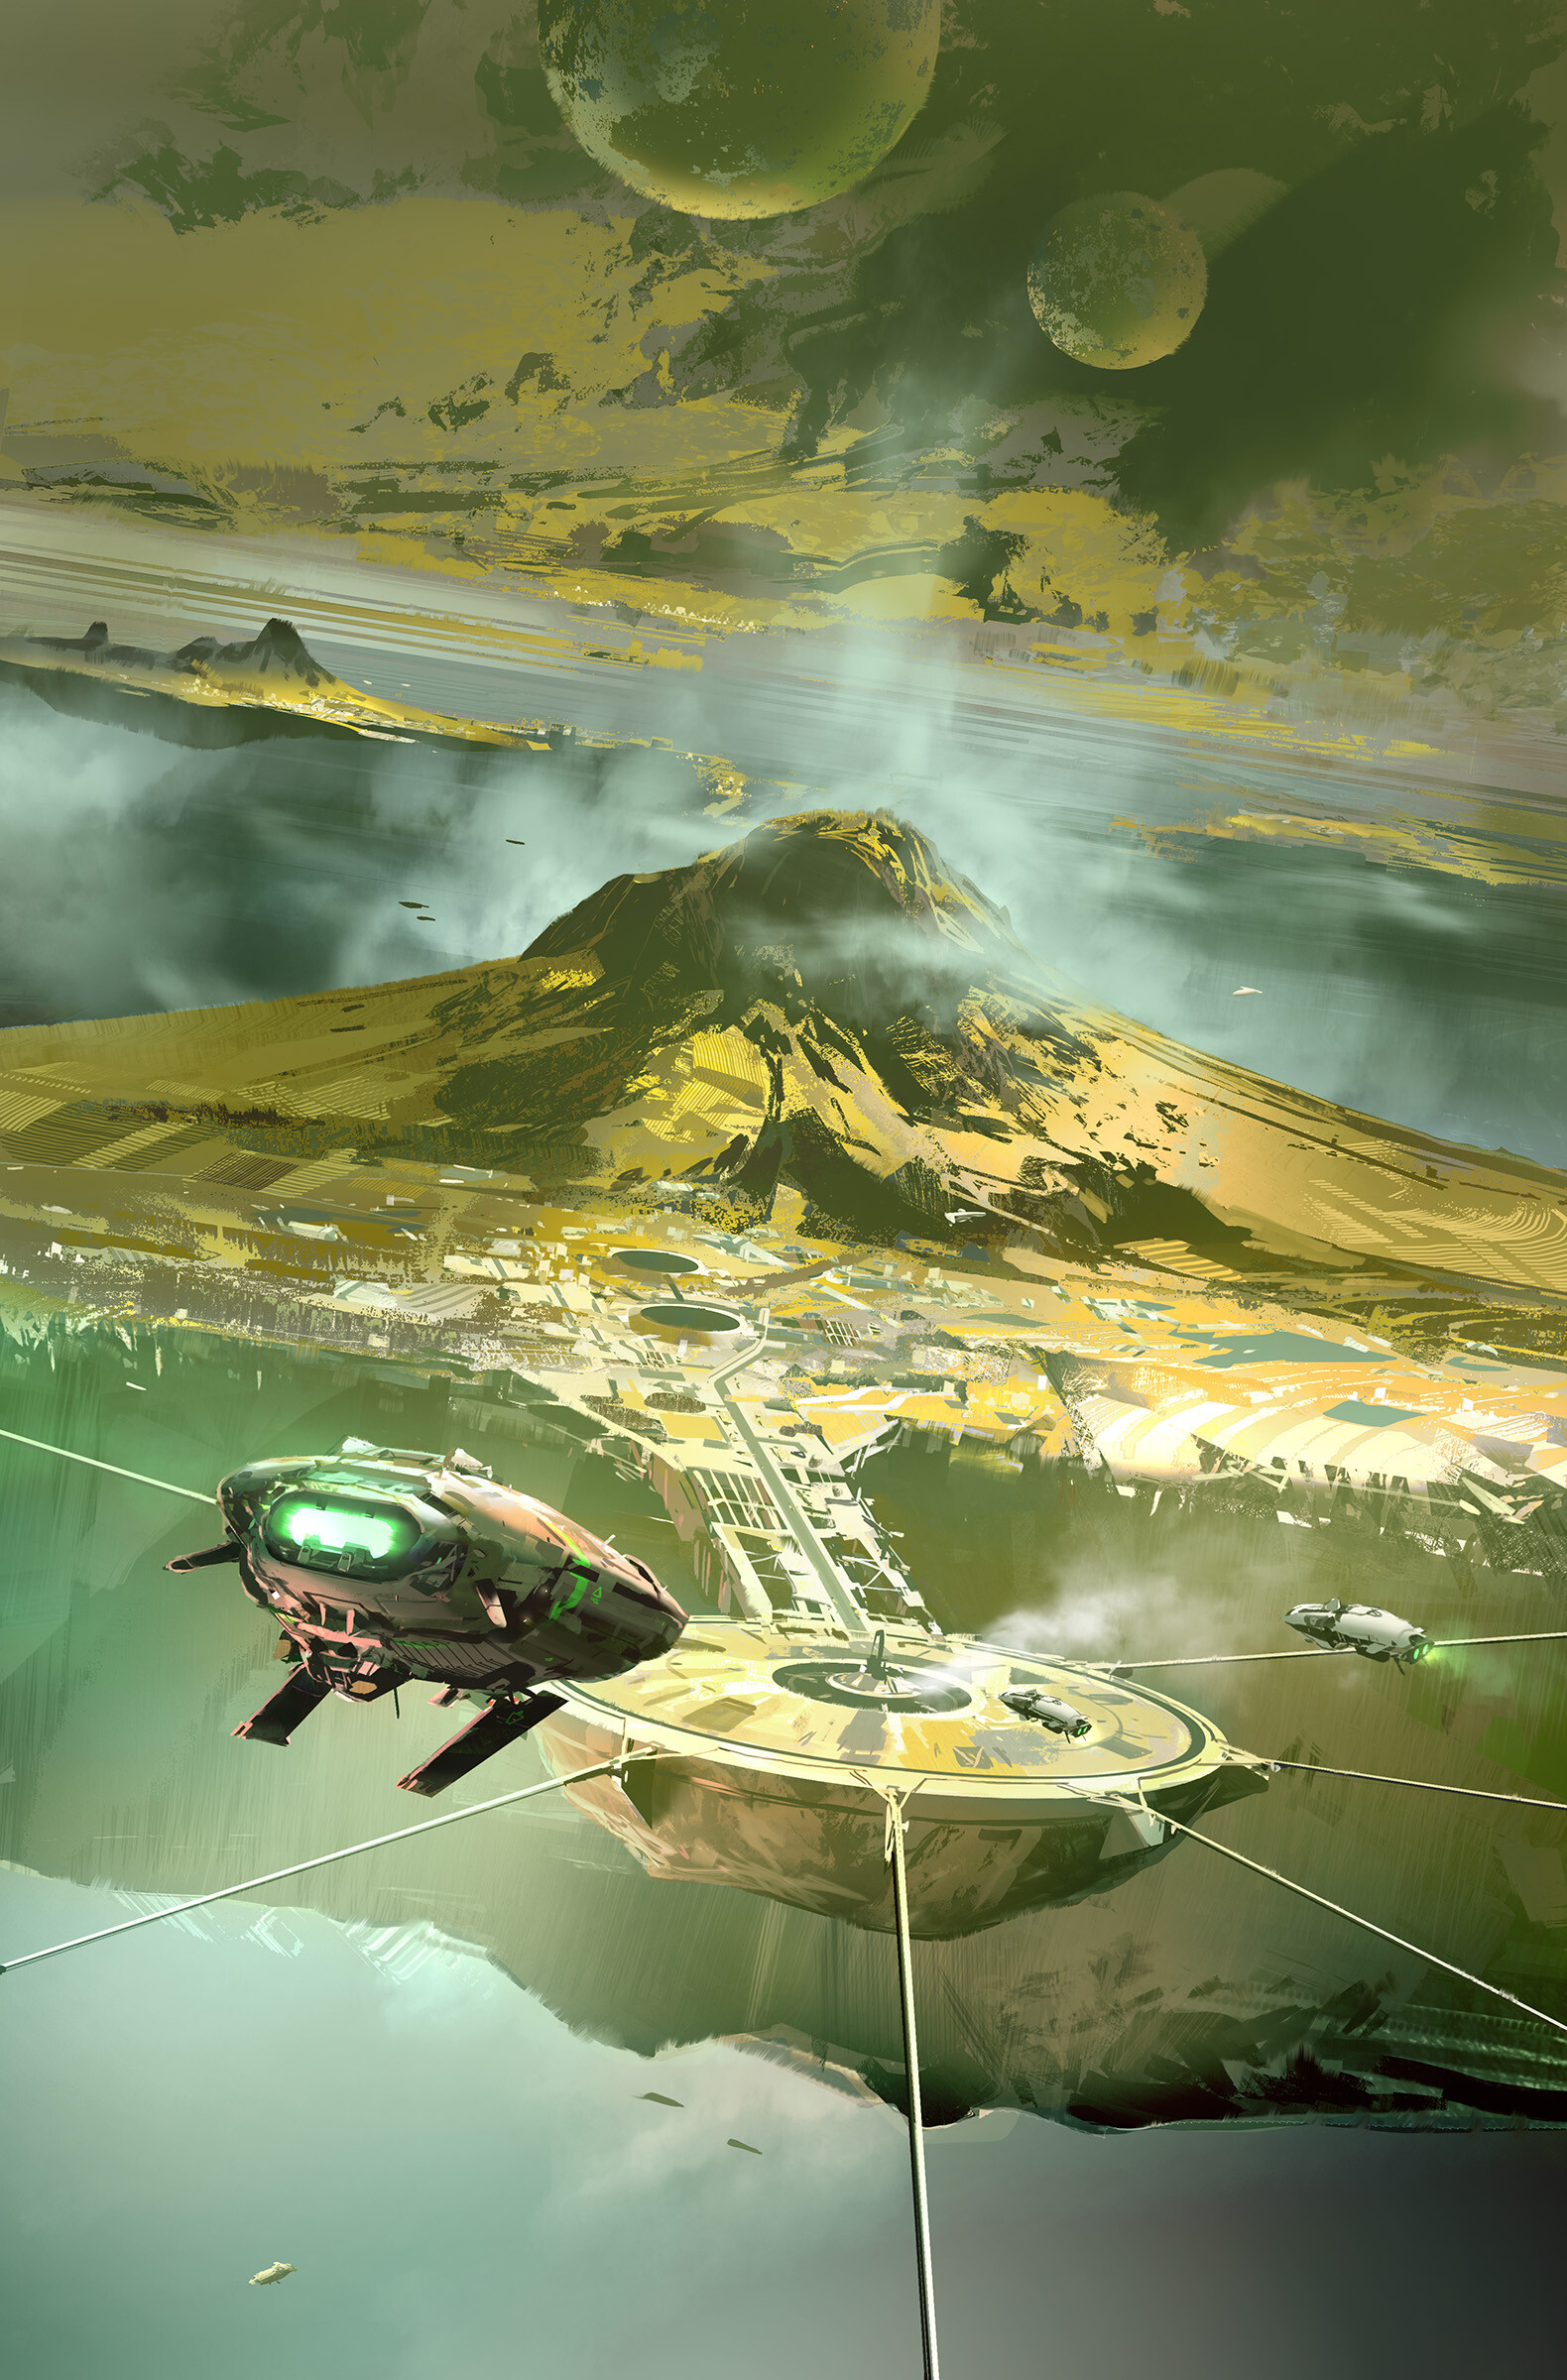 John Scalzi's The Last Emperox book cover by sparth